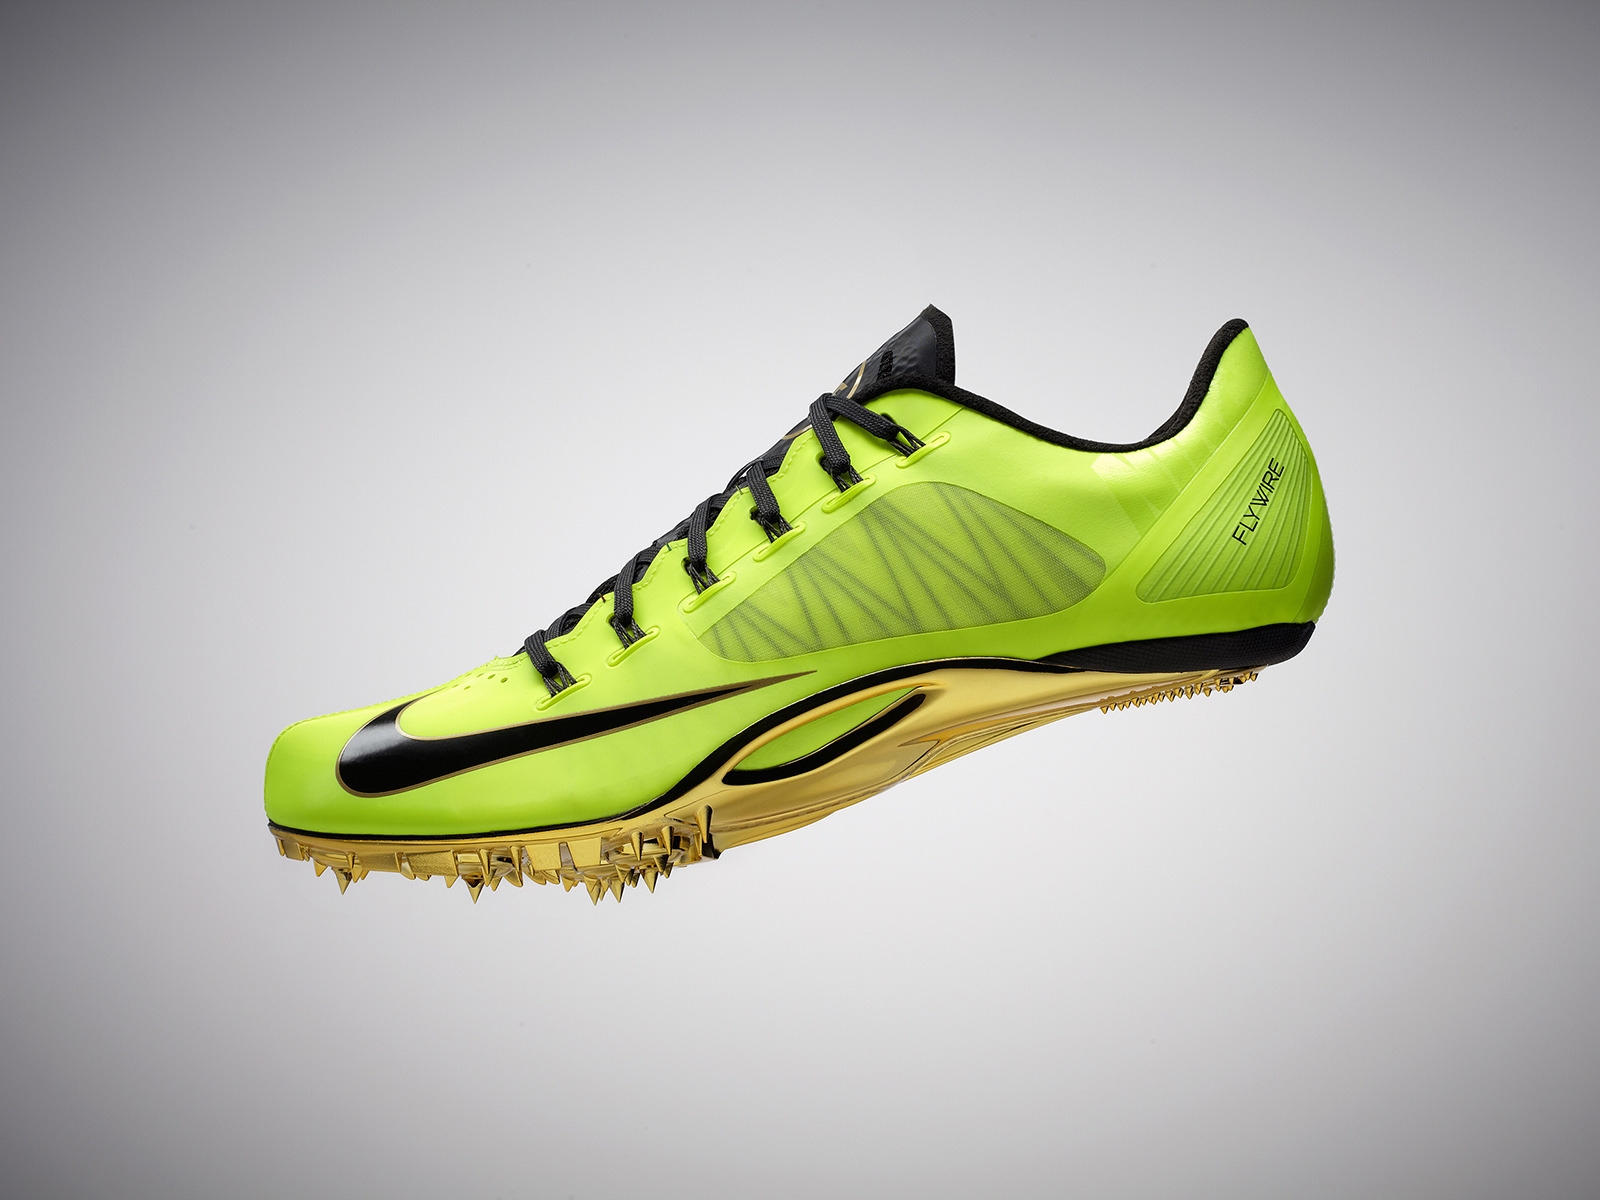 Nike Zoom Superfly R4 for 1600 x 1200 resolution